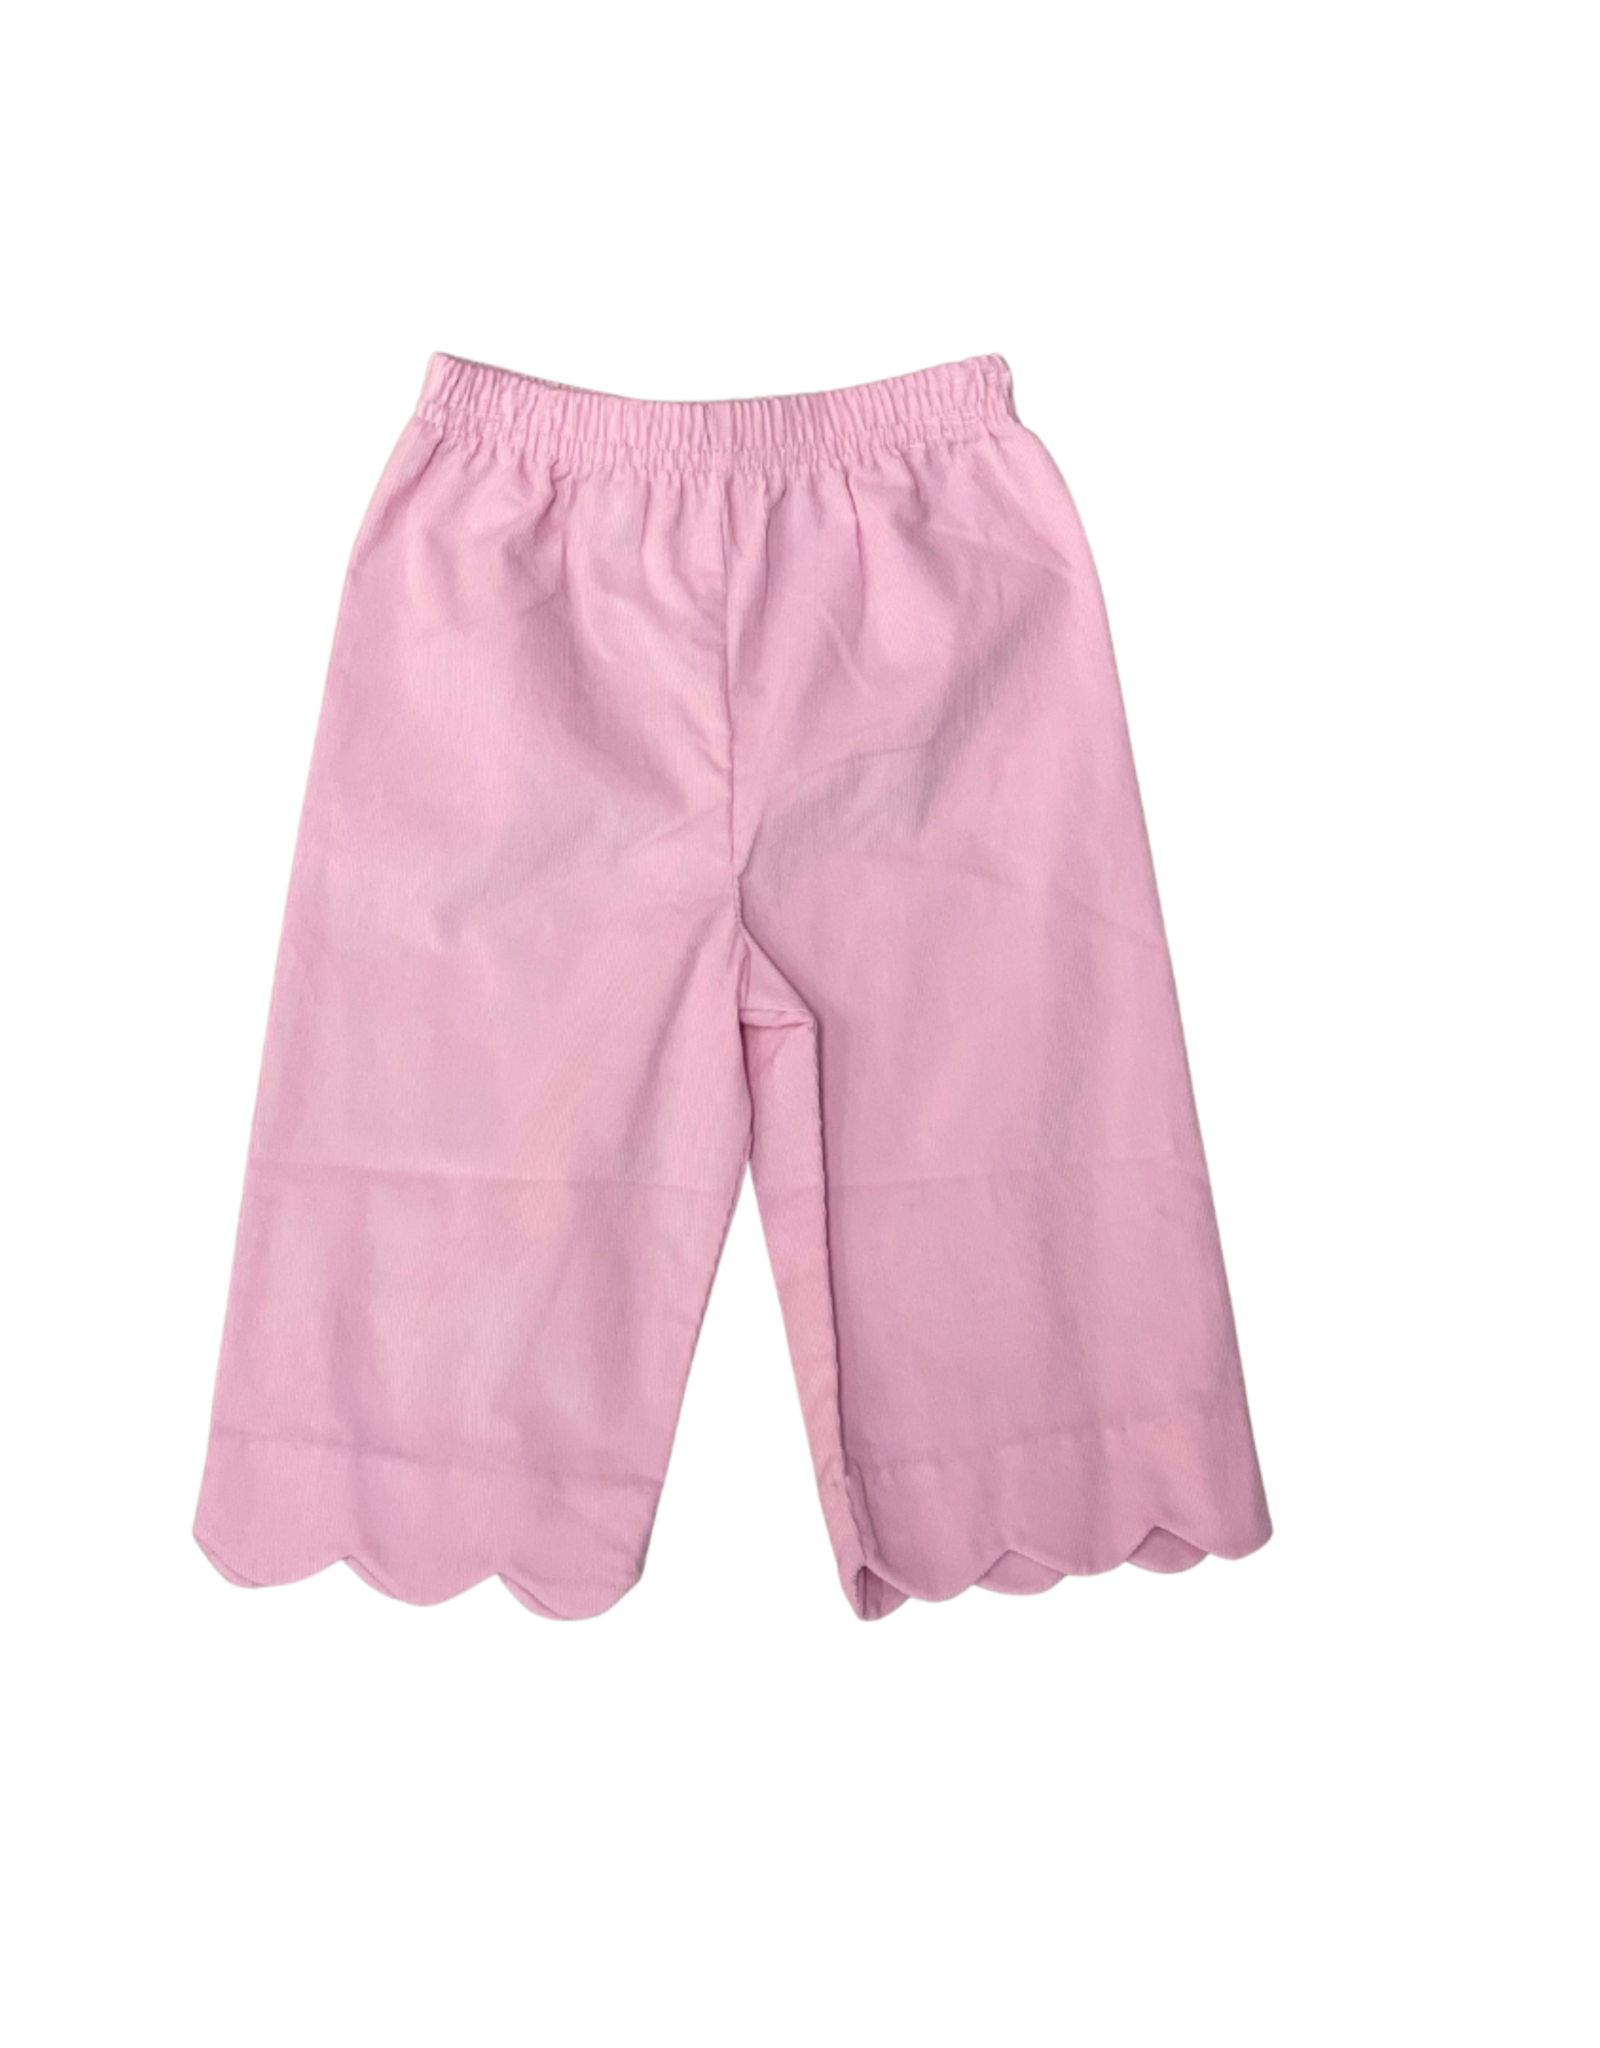 Zuccini Kendall Pant Pink Cord